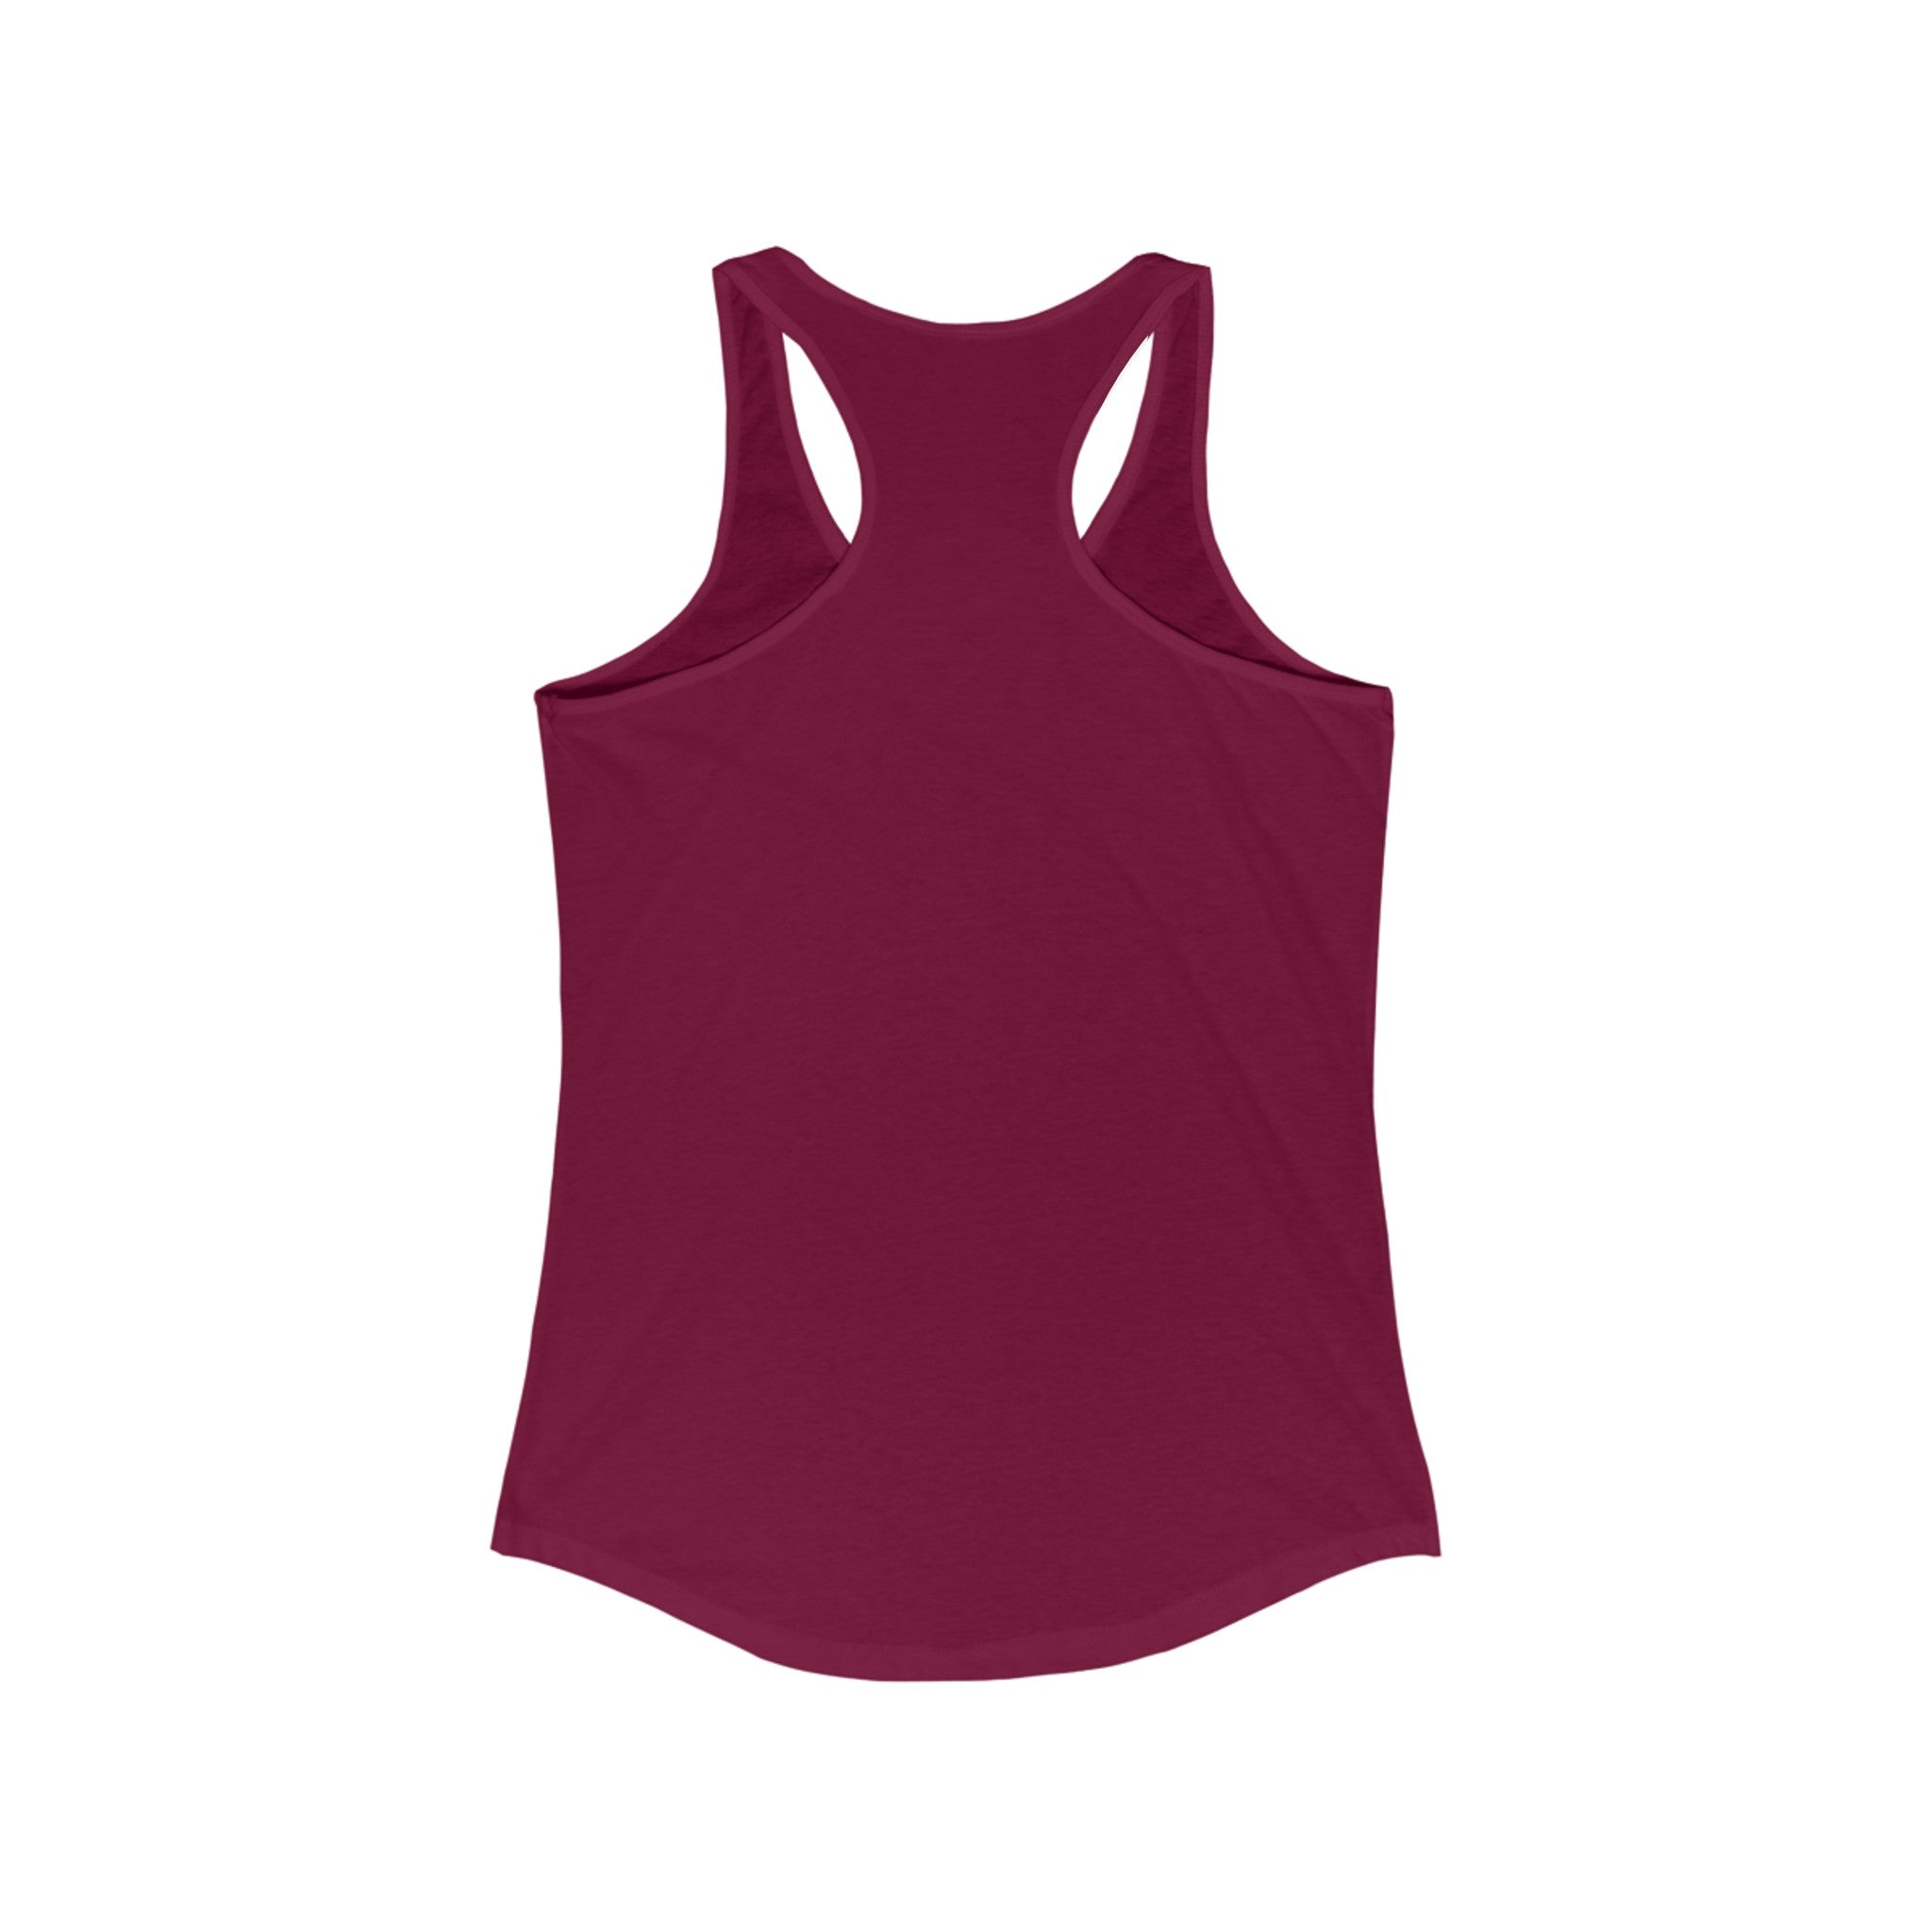 169829627150805987_2048.jpg - Keep on Detailing v2 Women's Tank - Undrdog Surface Products